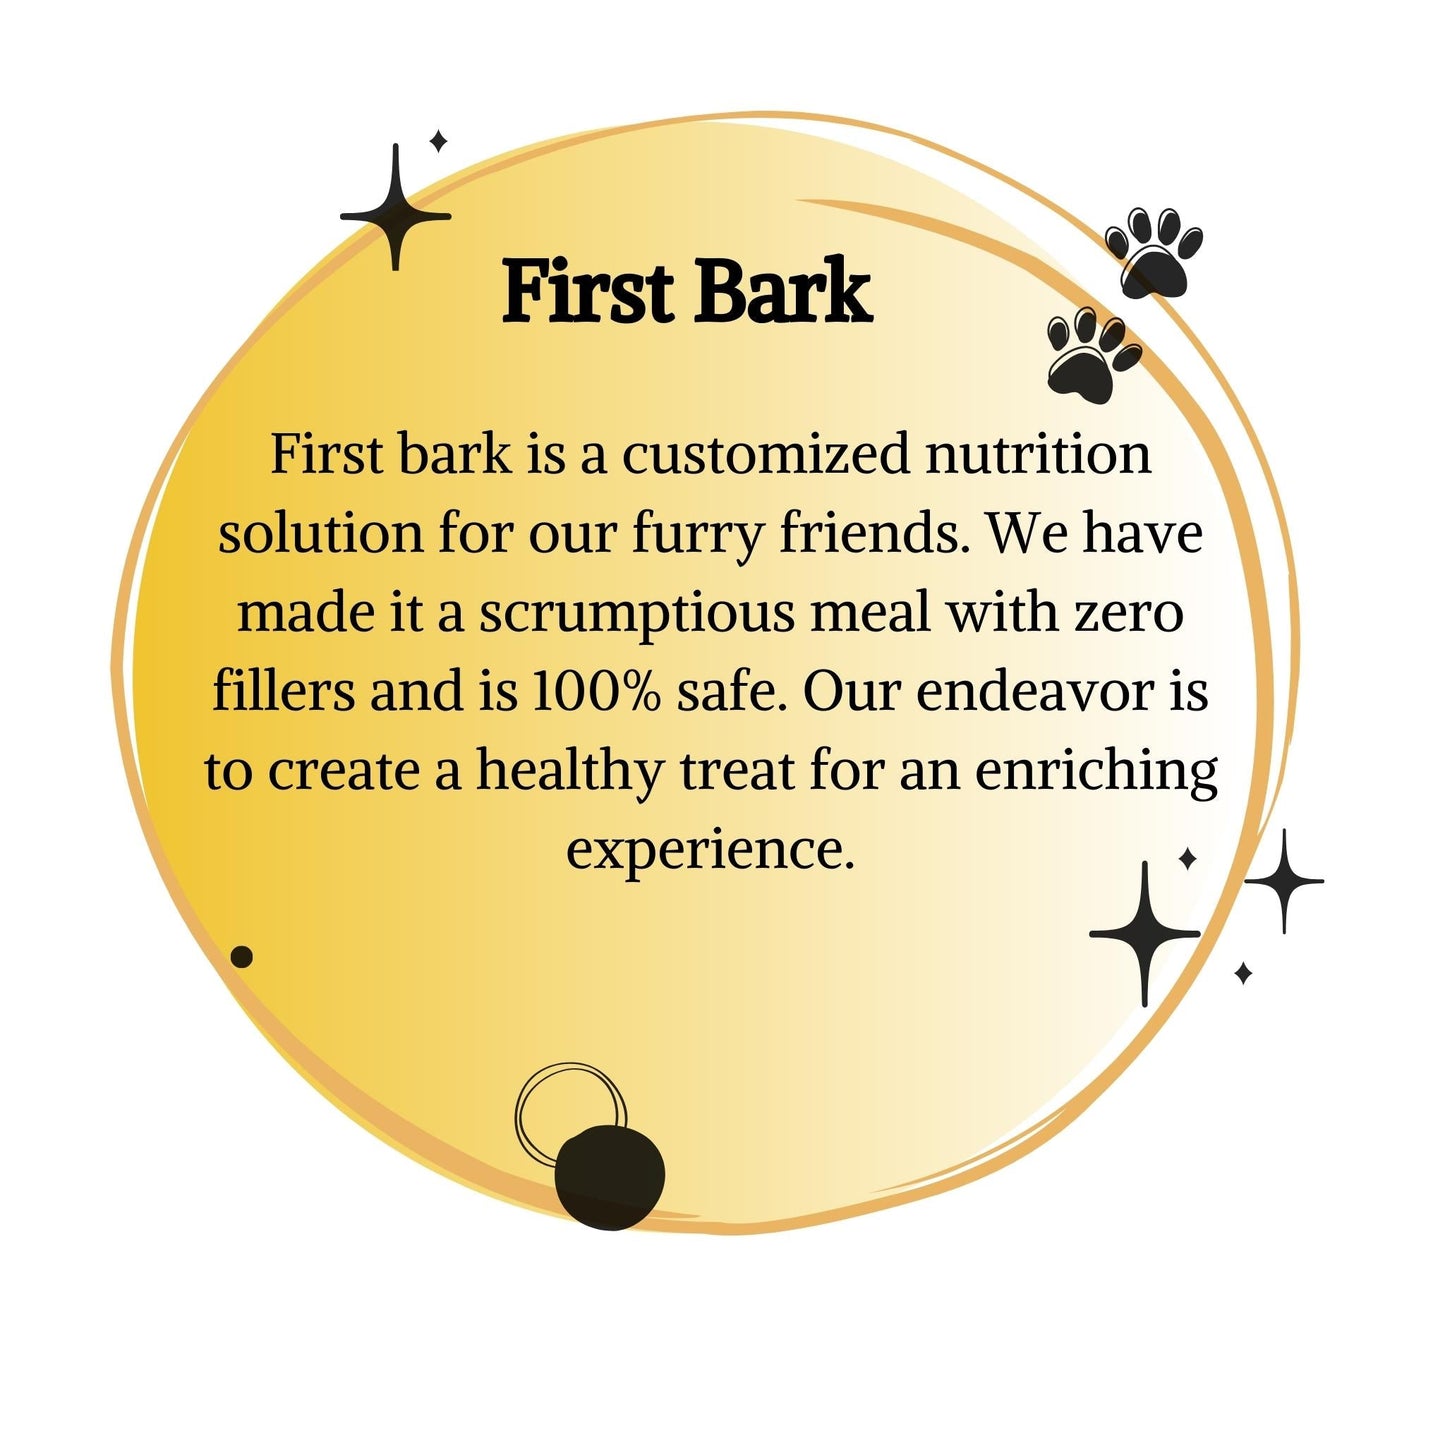 First Bark Chicken and Cod Roll Treats for Dogs, 70gm, Pack of 6